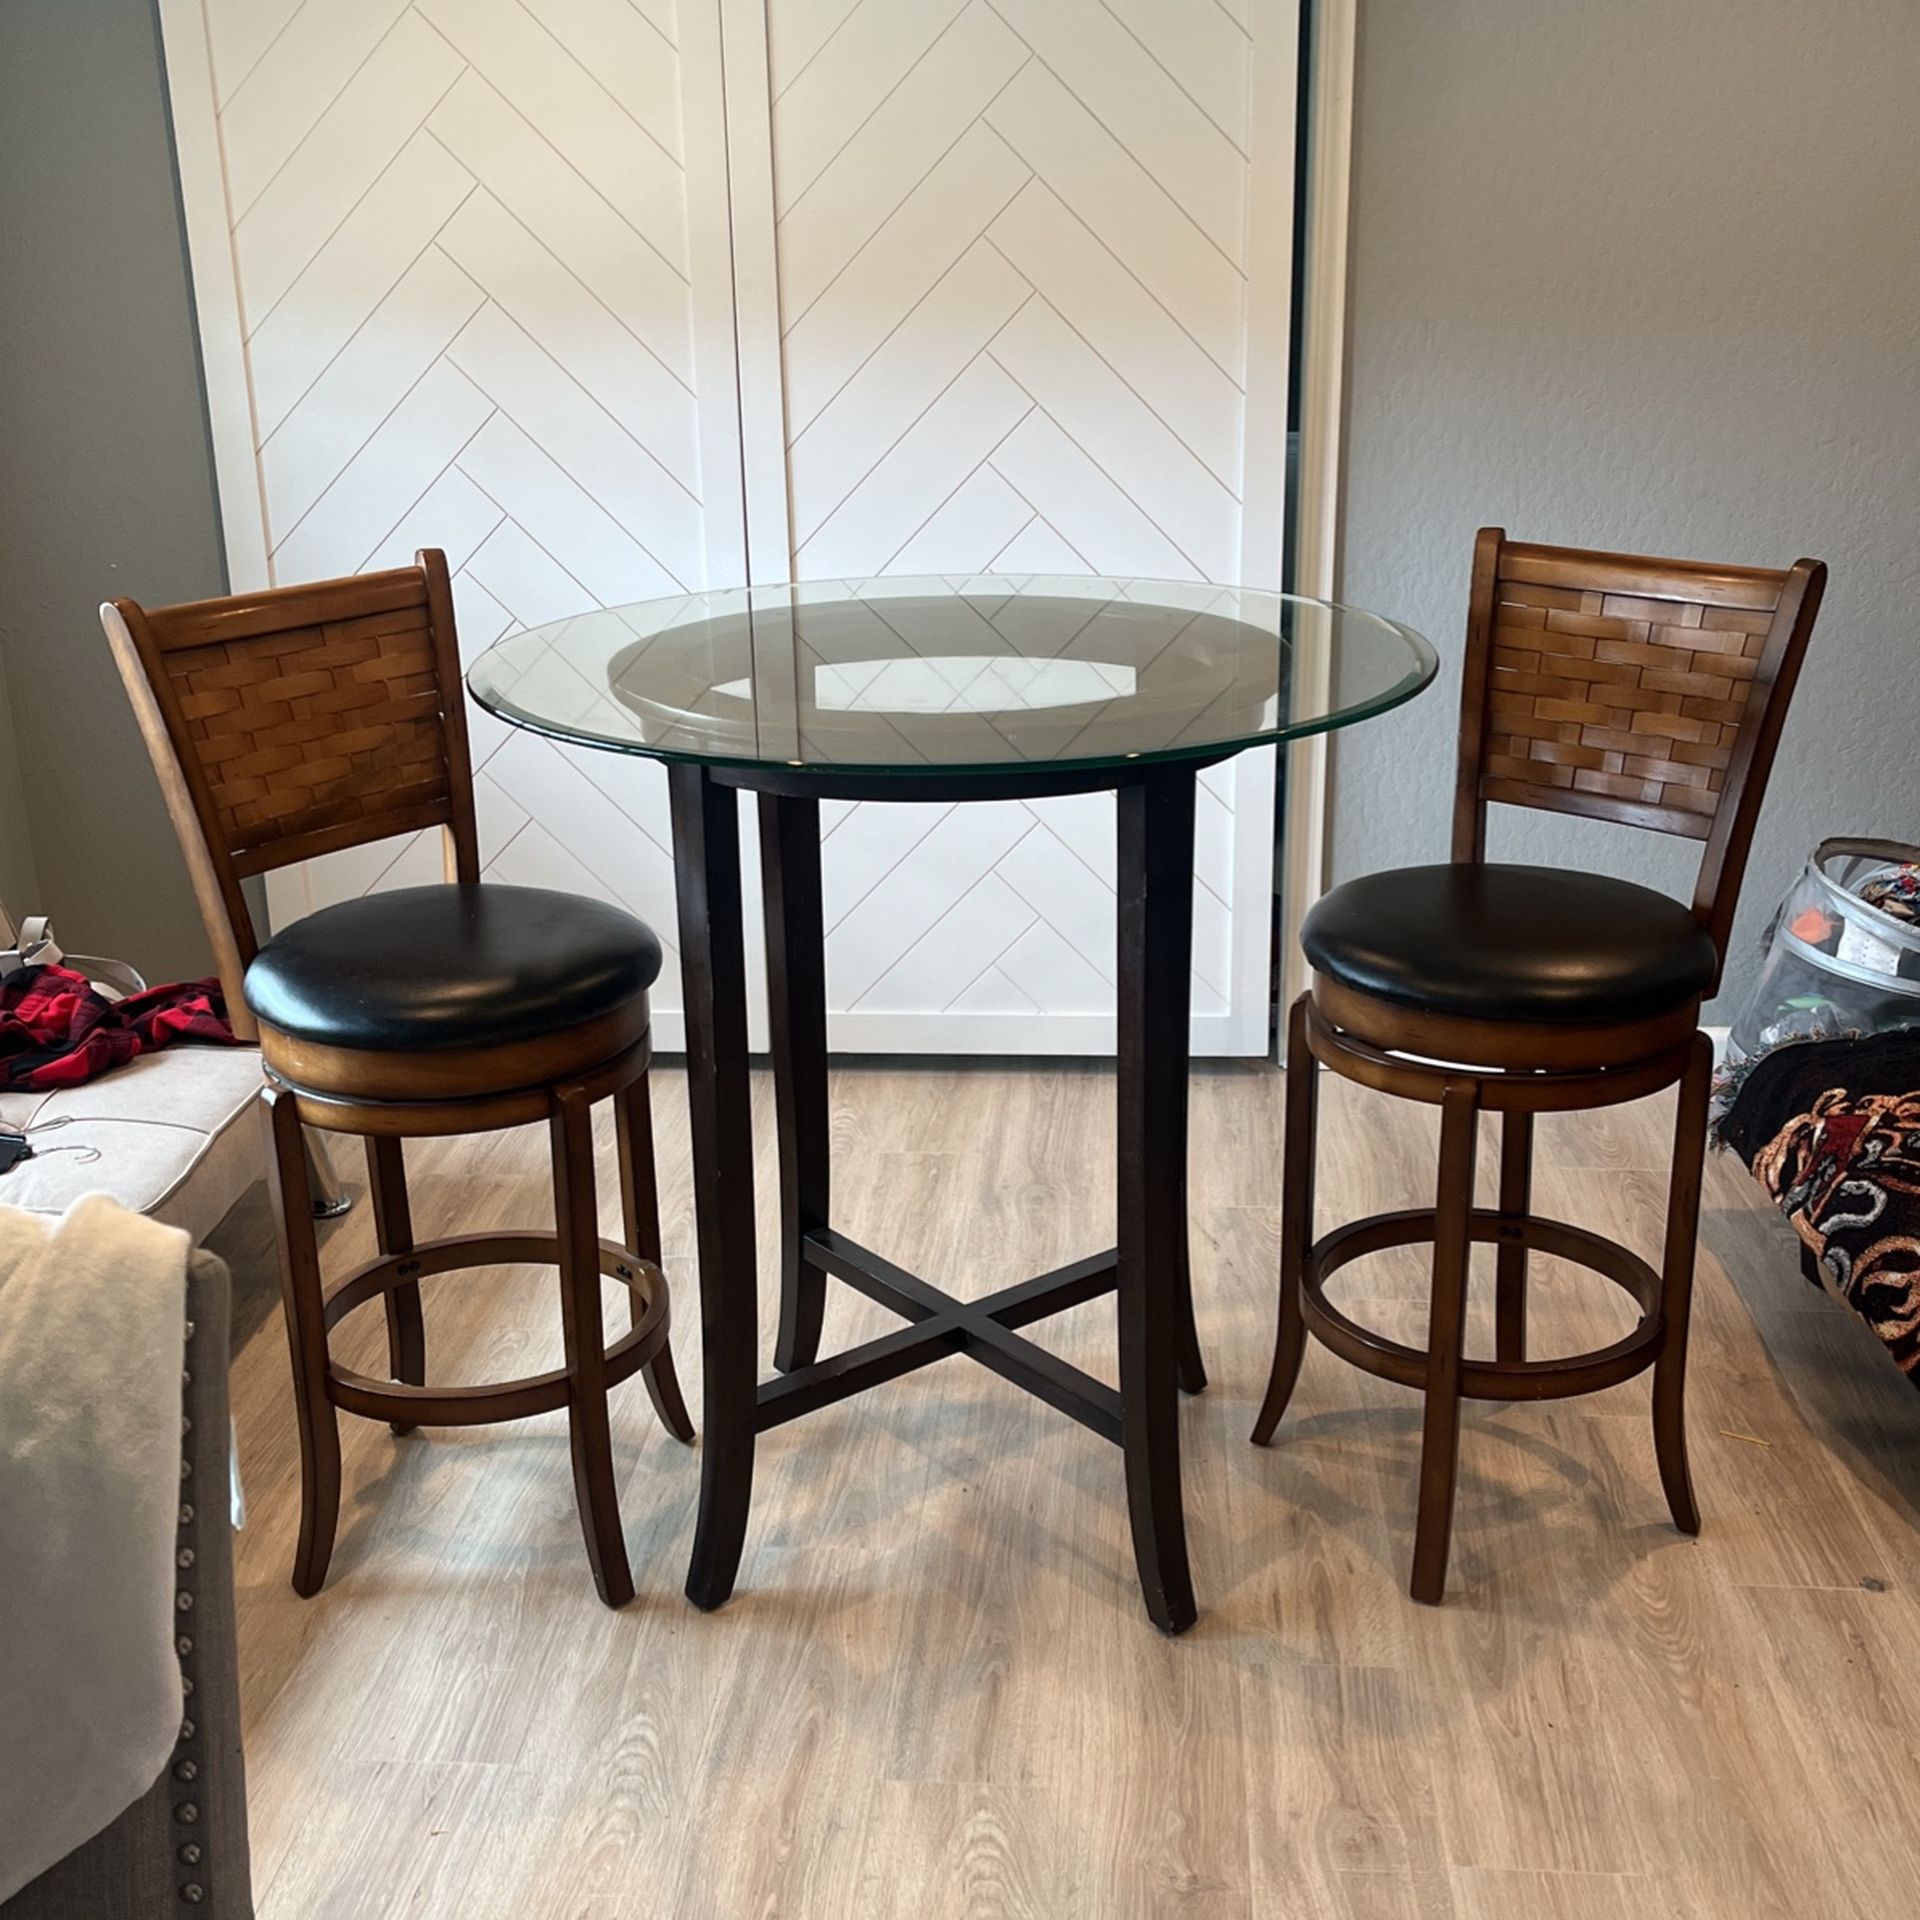 Glass table real wood with 2 spinning stool chairs